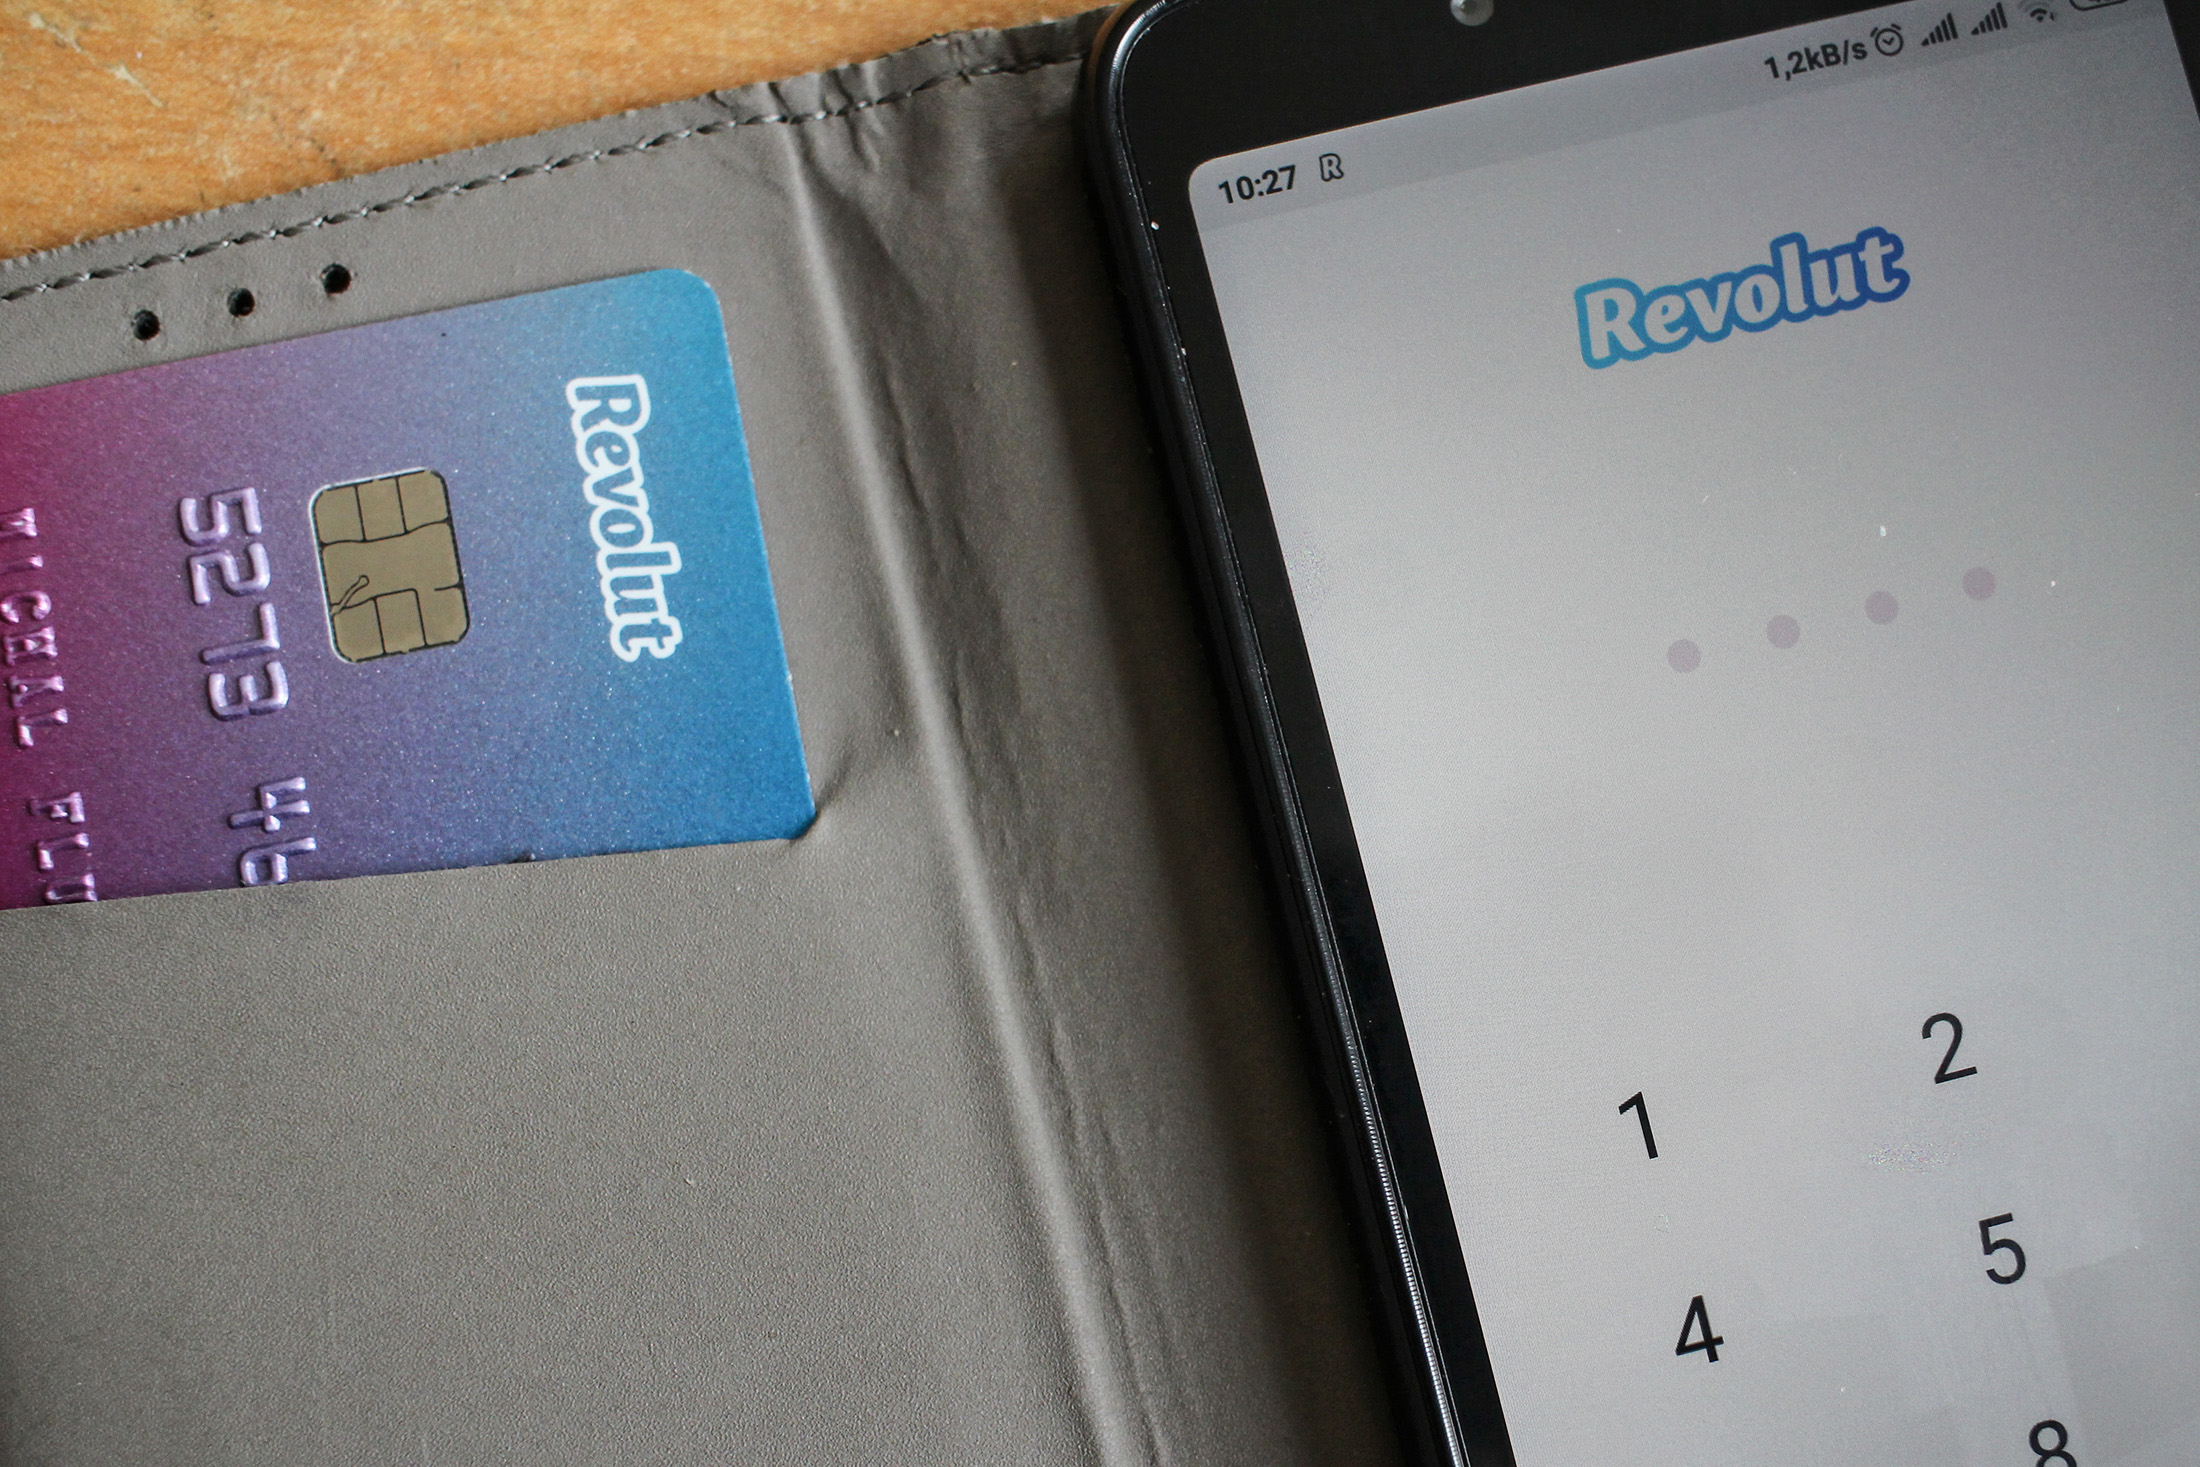 Over 400,000 Revolut users in Poland